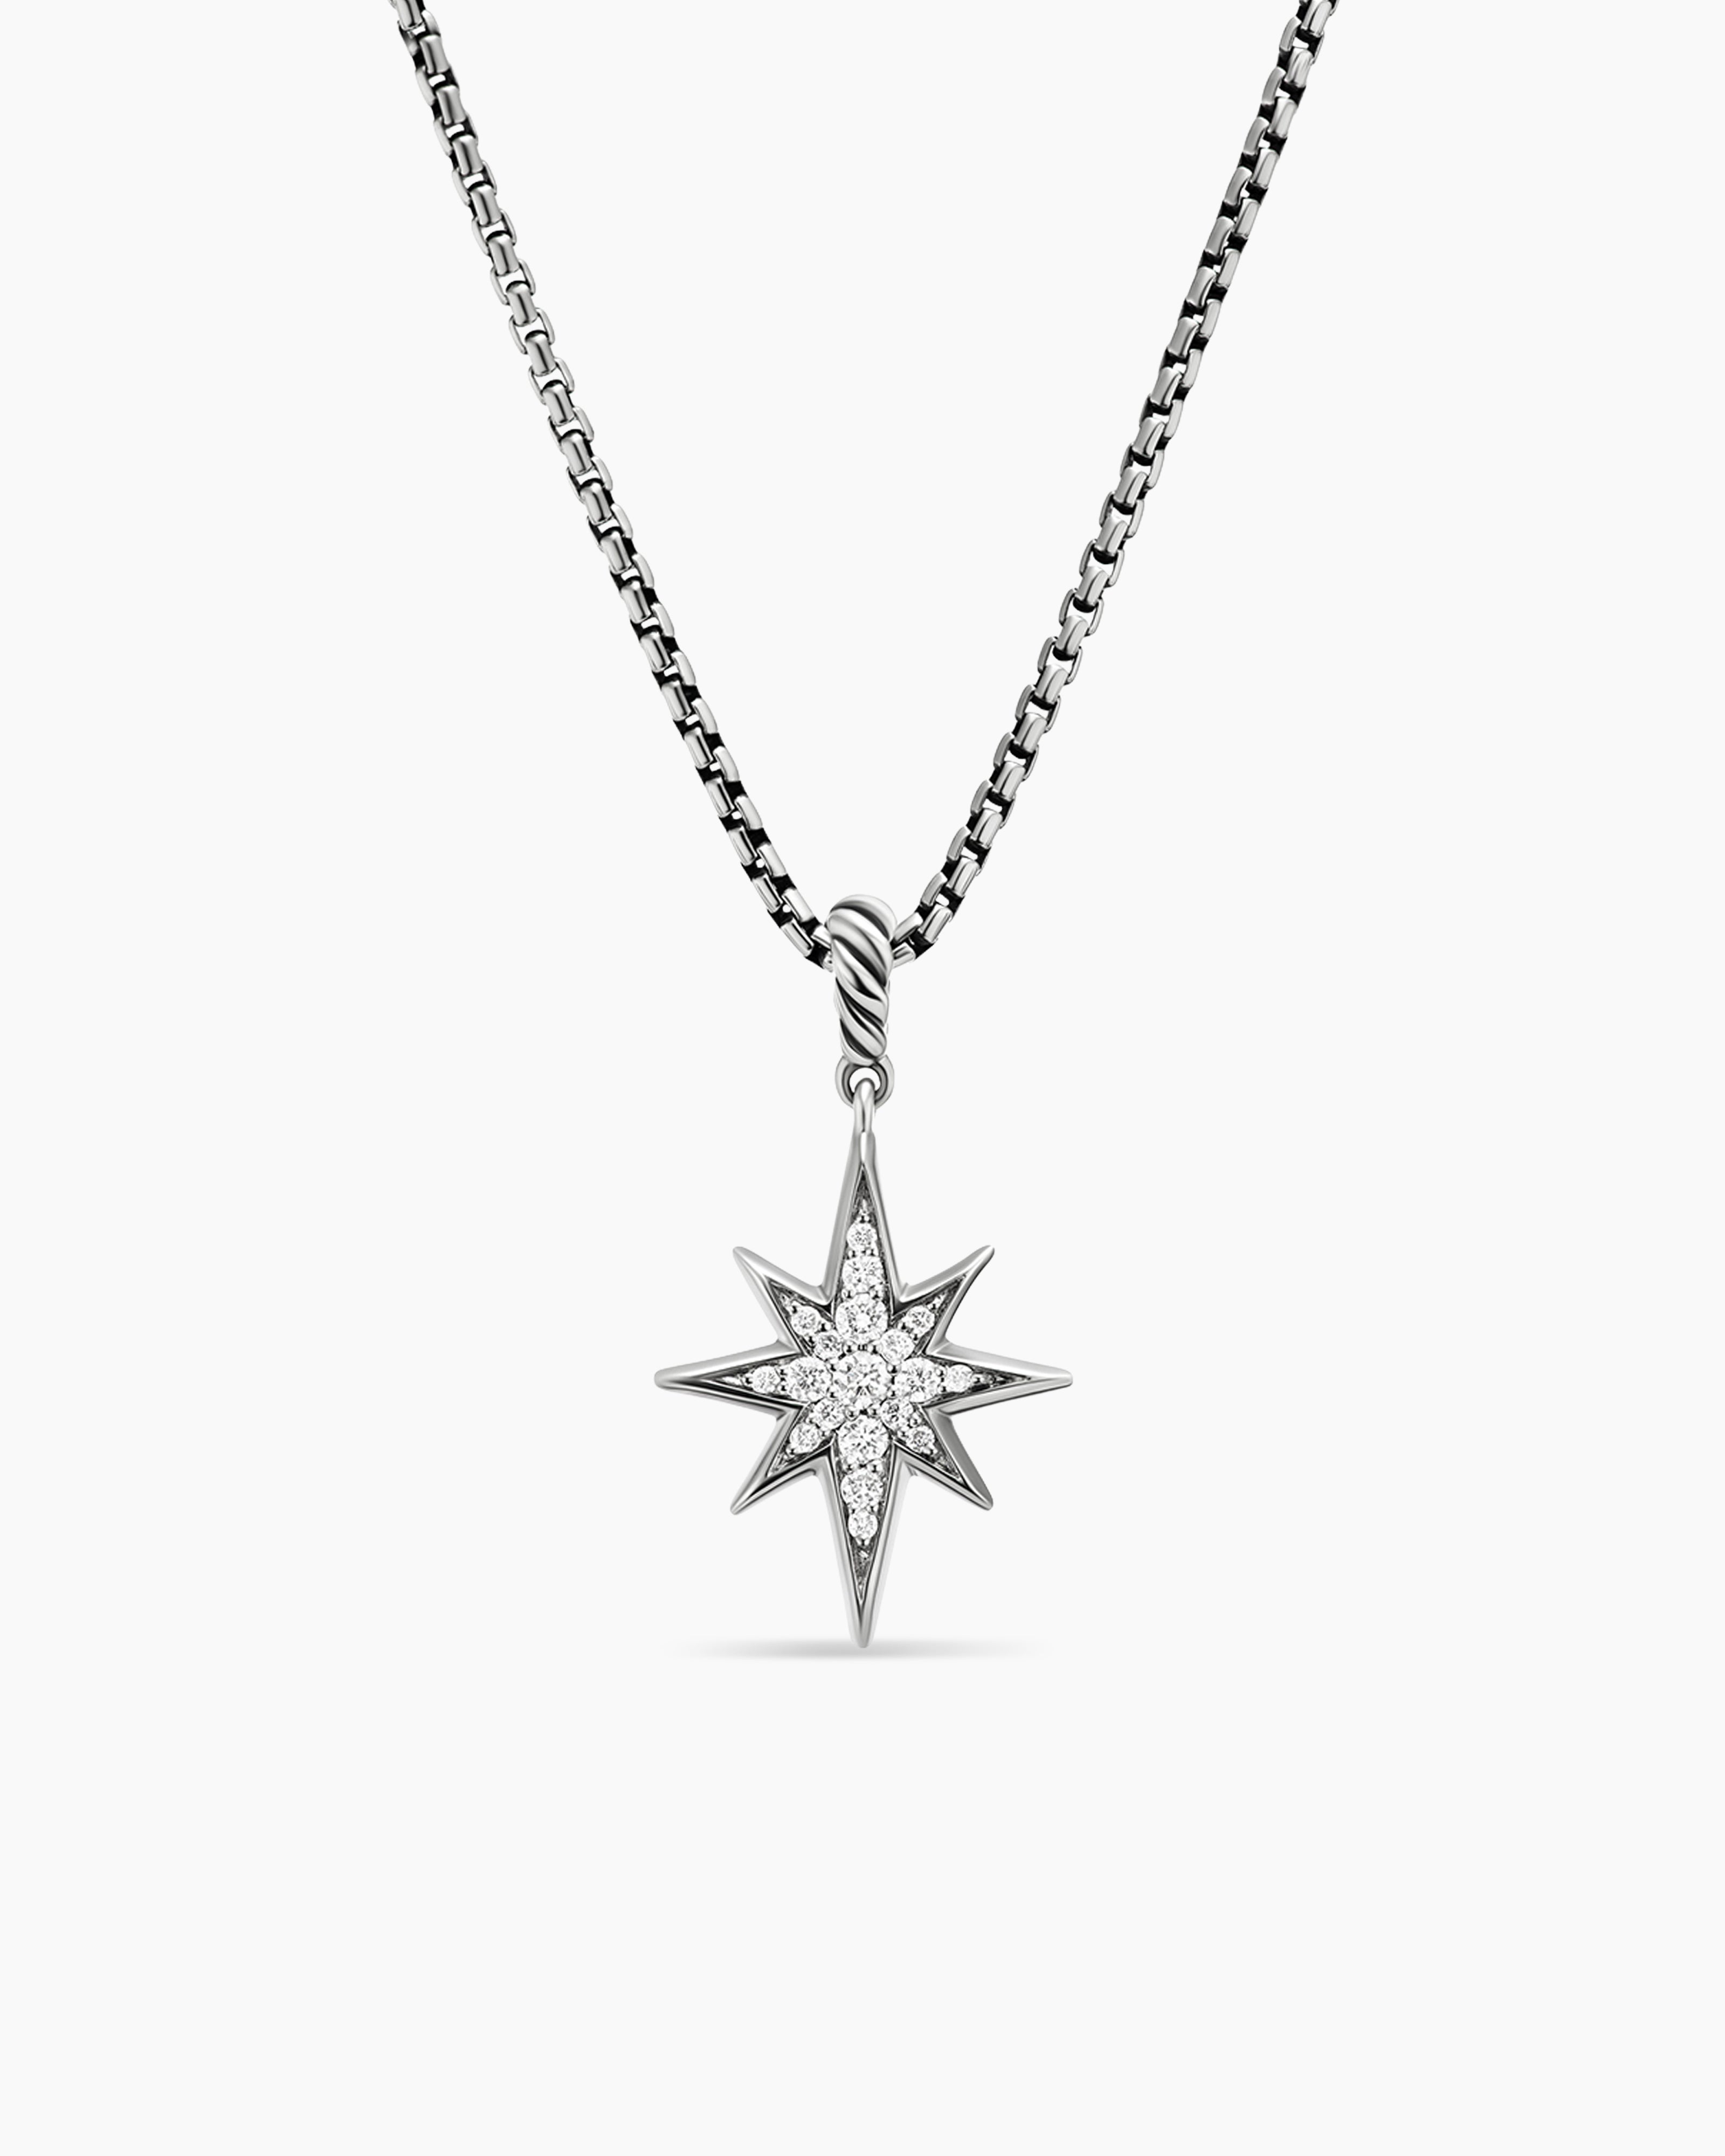 Buy 925 Sterling Silver Pole Star Necklace, North Star Necklace, Polaris  Necklace, Mothers Day Gift, Valentines Day Gift, Christmas Gift, Online in  India - Etsy